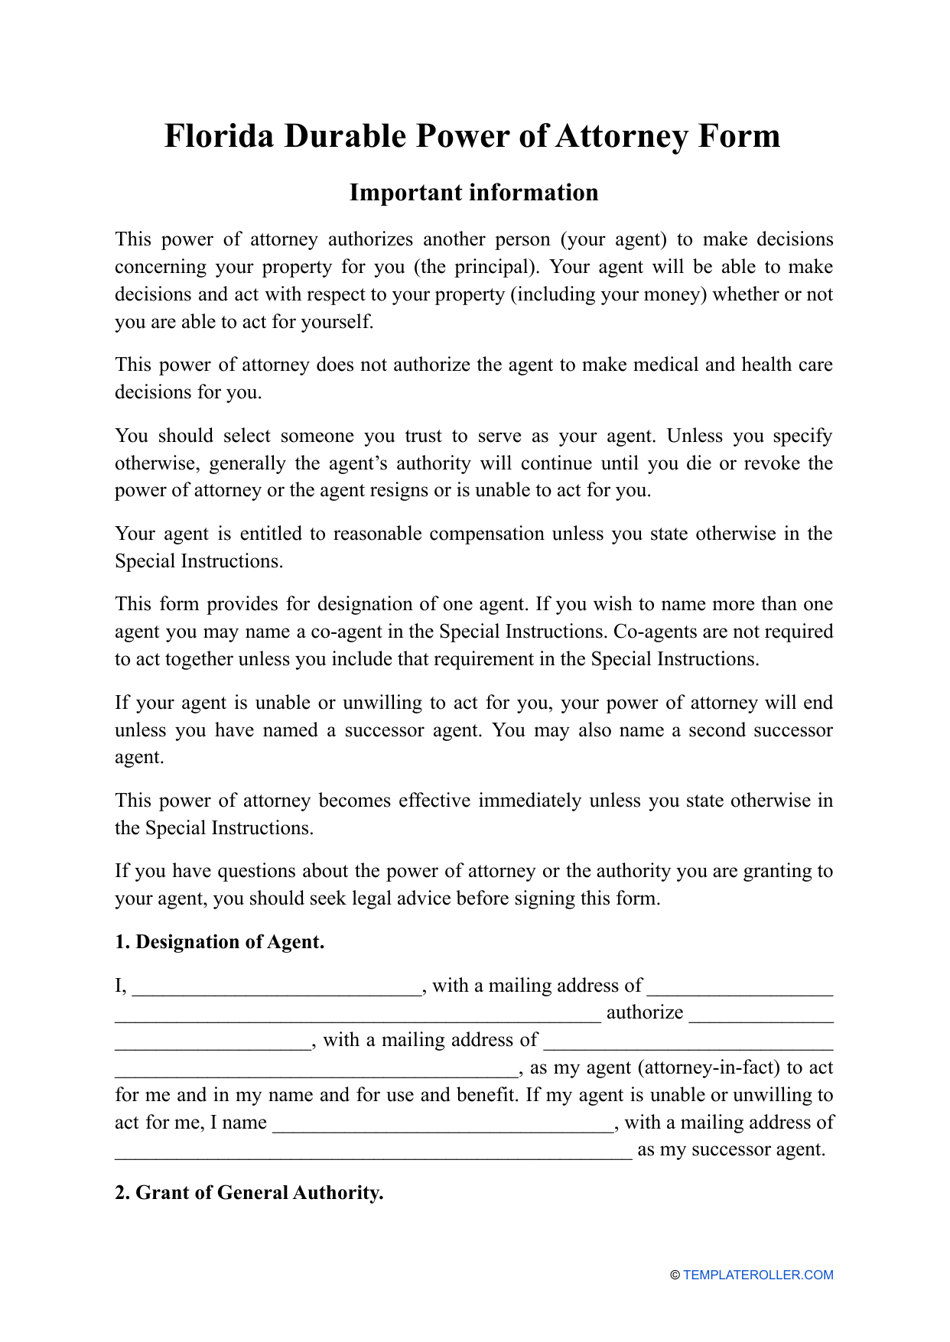 Durable Power of Attorney Form - Florida, Page 1